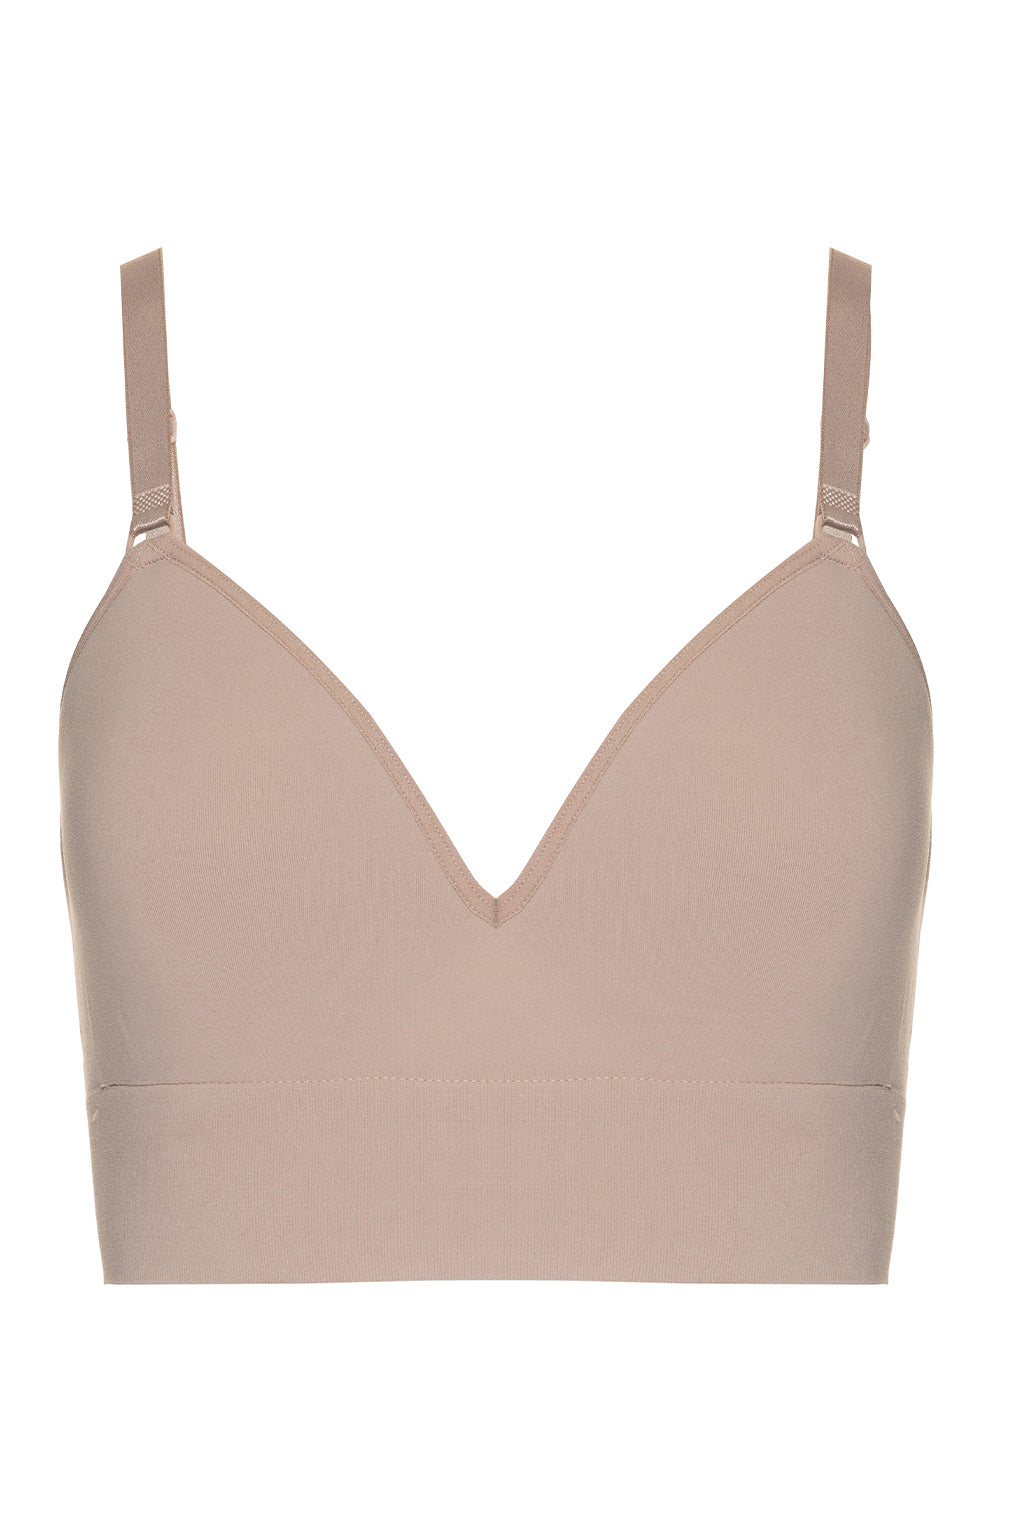 Brazilian Shades Line Deep Bra with Special Padded Cups